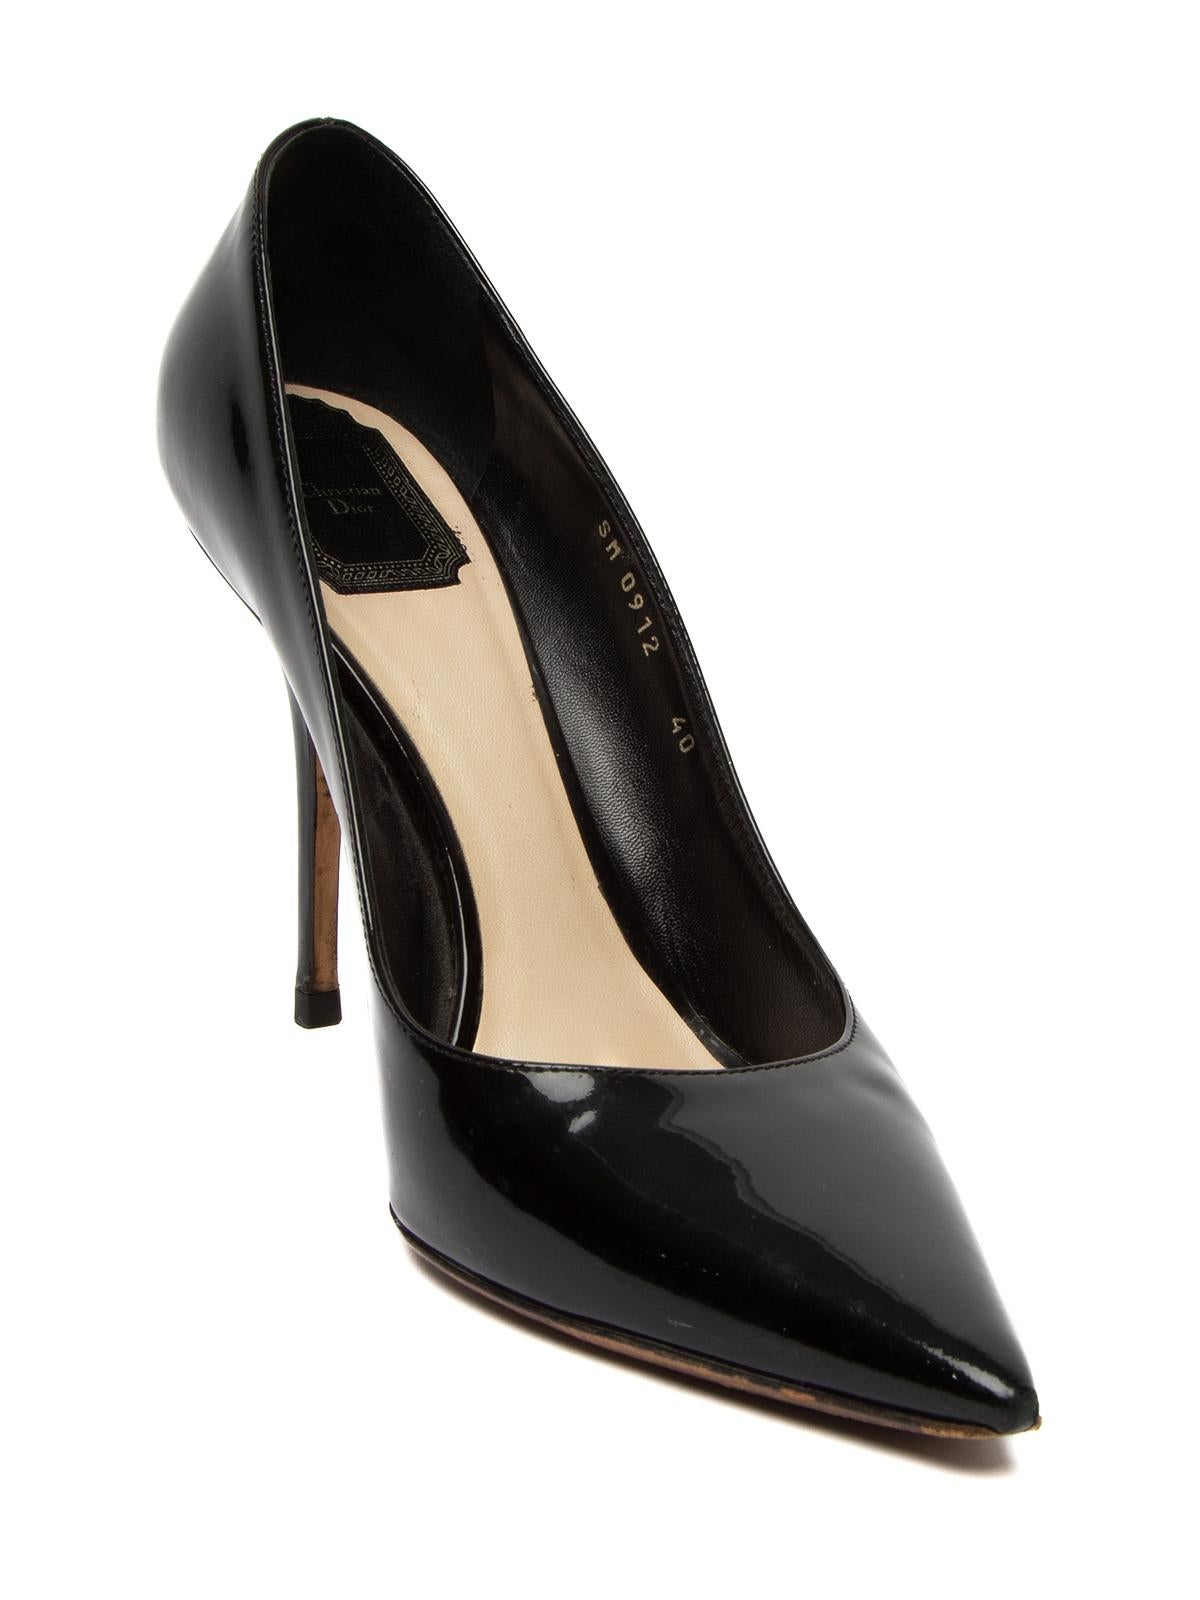 CONDITION is Good. Minor wear to heel is evident. Light wear to point of heel, left heel stem and outsole on this used Christian Dior designer resale item. Details Colour - black Material - patent leather Style- pump Toe style - point-toe Heel style